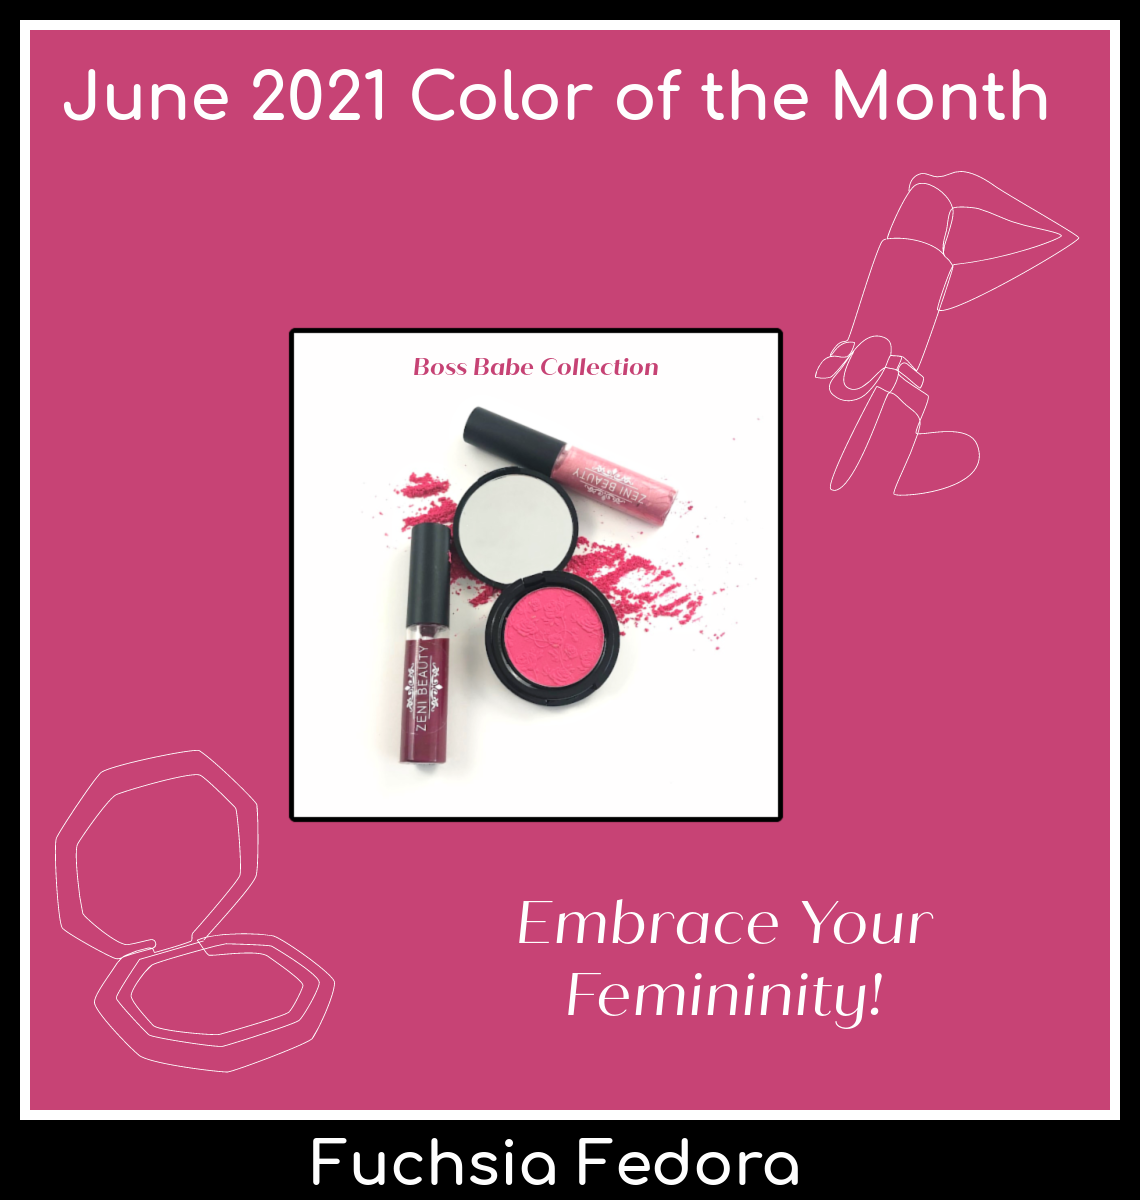 June's Color of the Month is Fuchsia Fedora